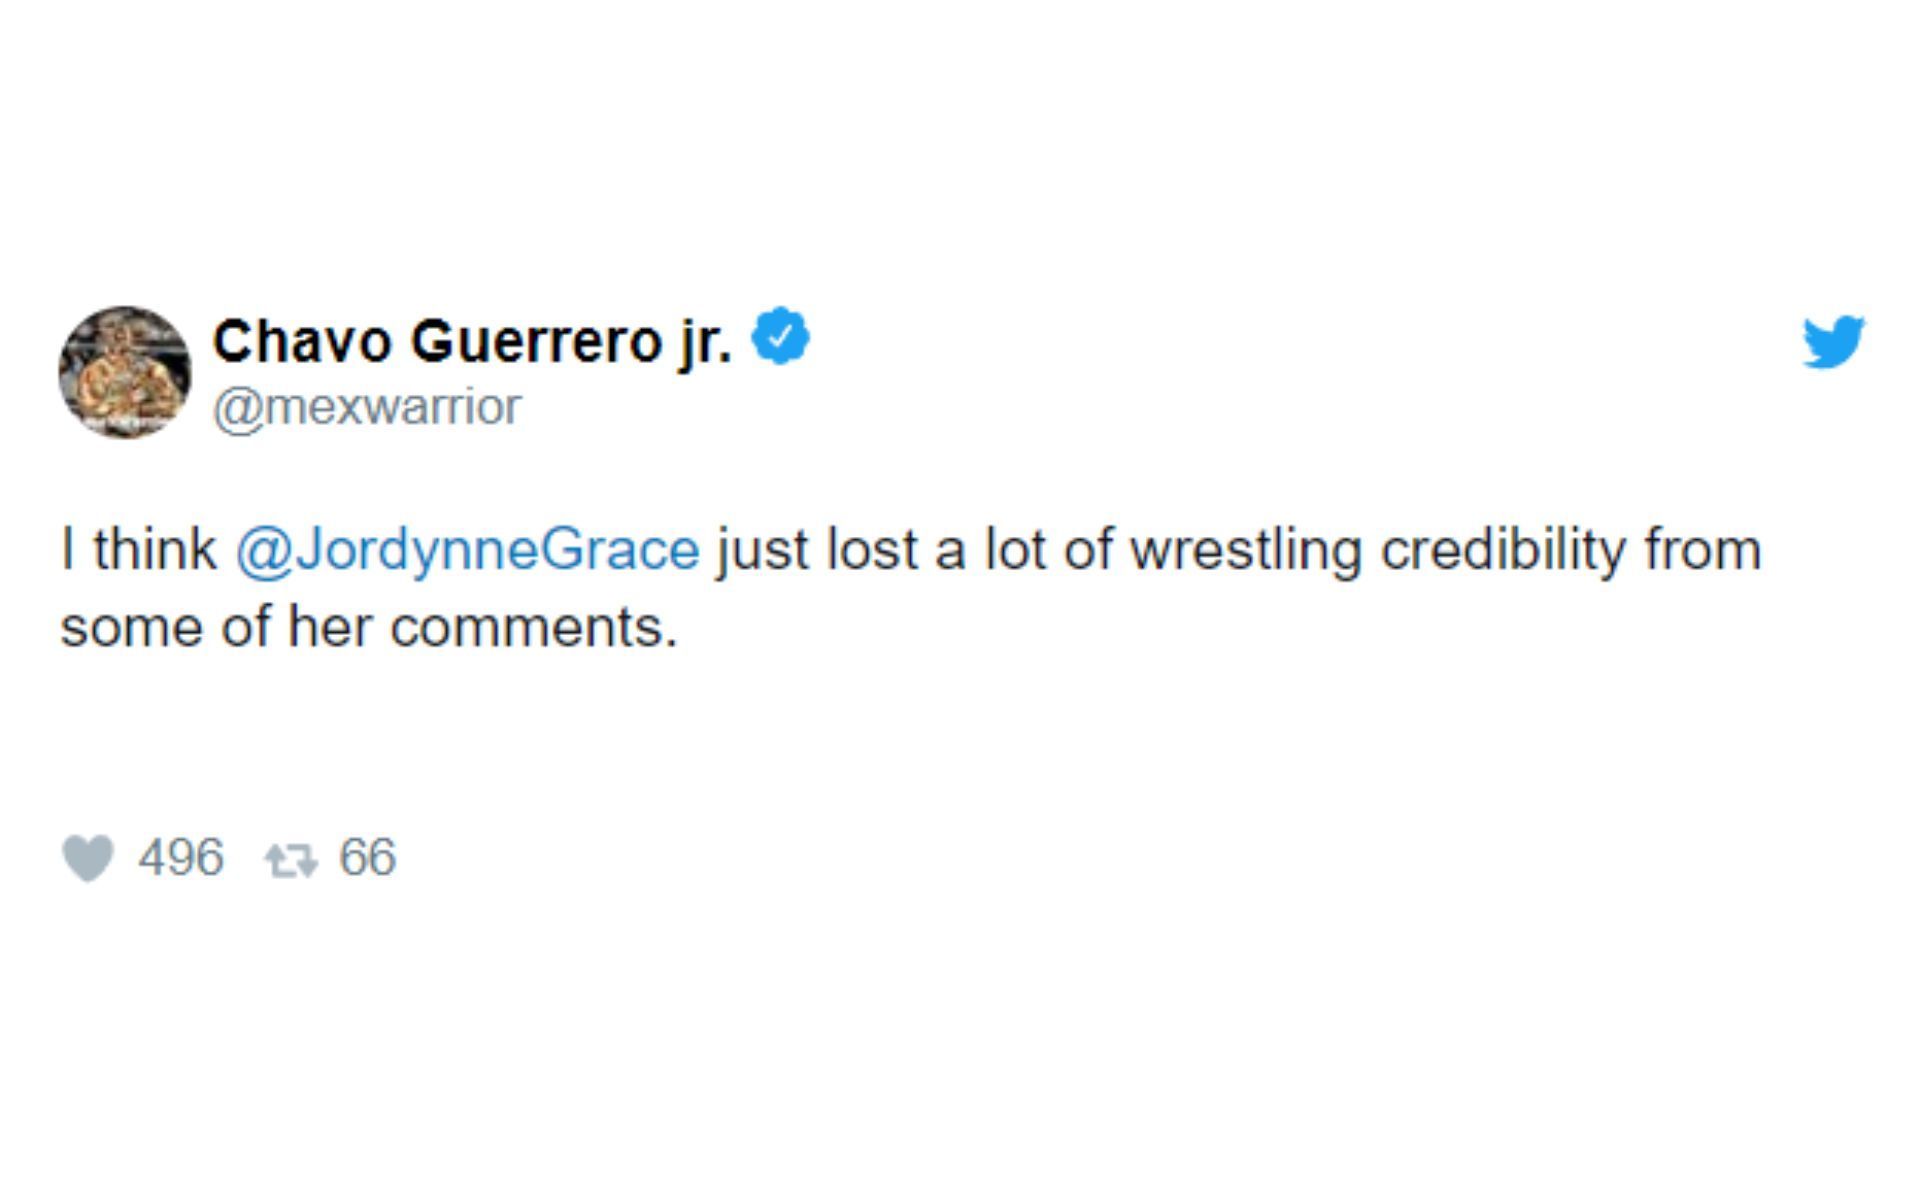 Chavo Guerrero had deleted the tweet responing to Jordynne Grace&#039;s comments